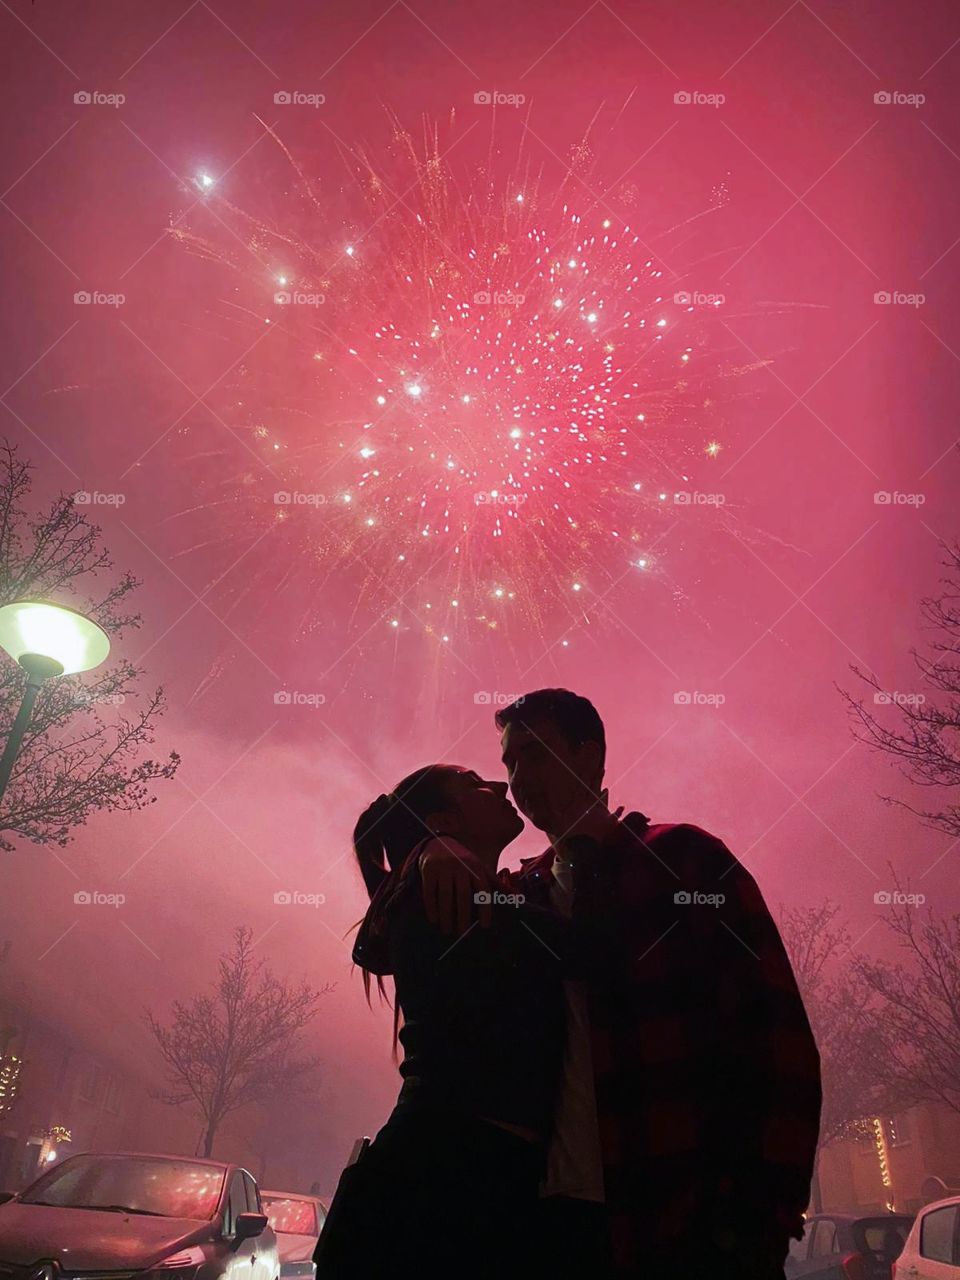 Couple under the nightsky,
newyears eve! Love, firework, party